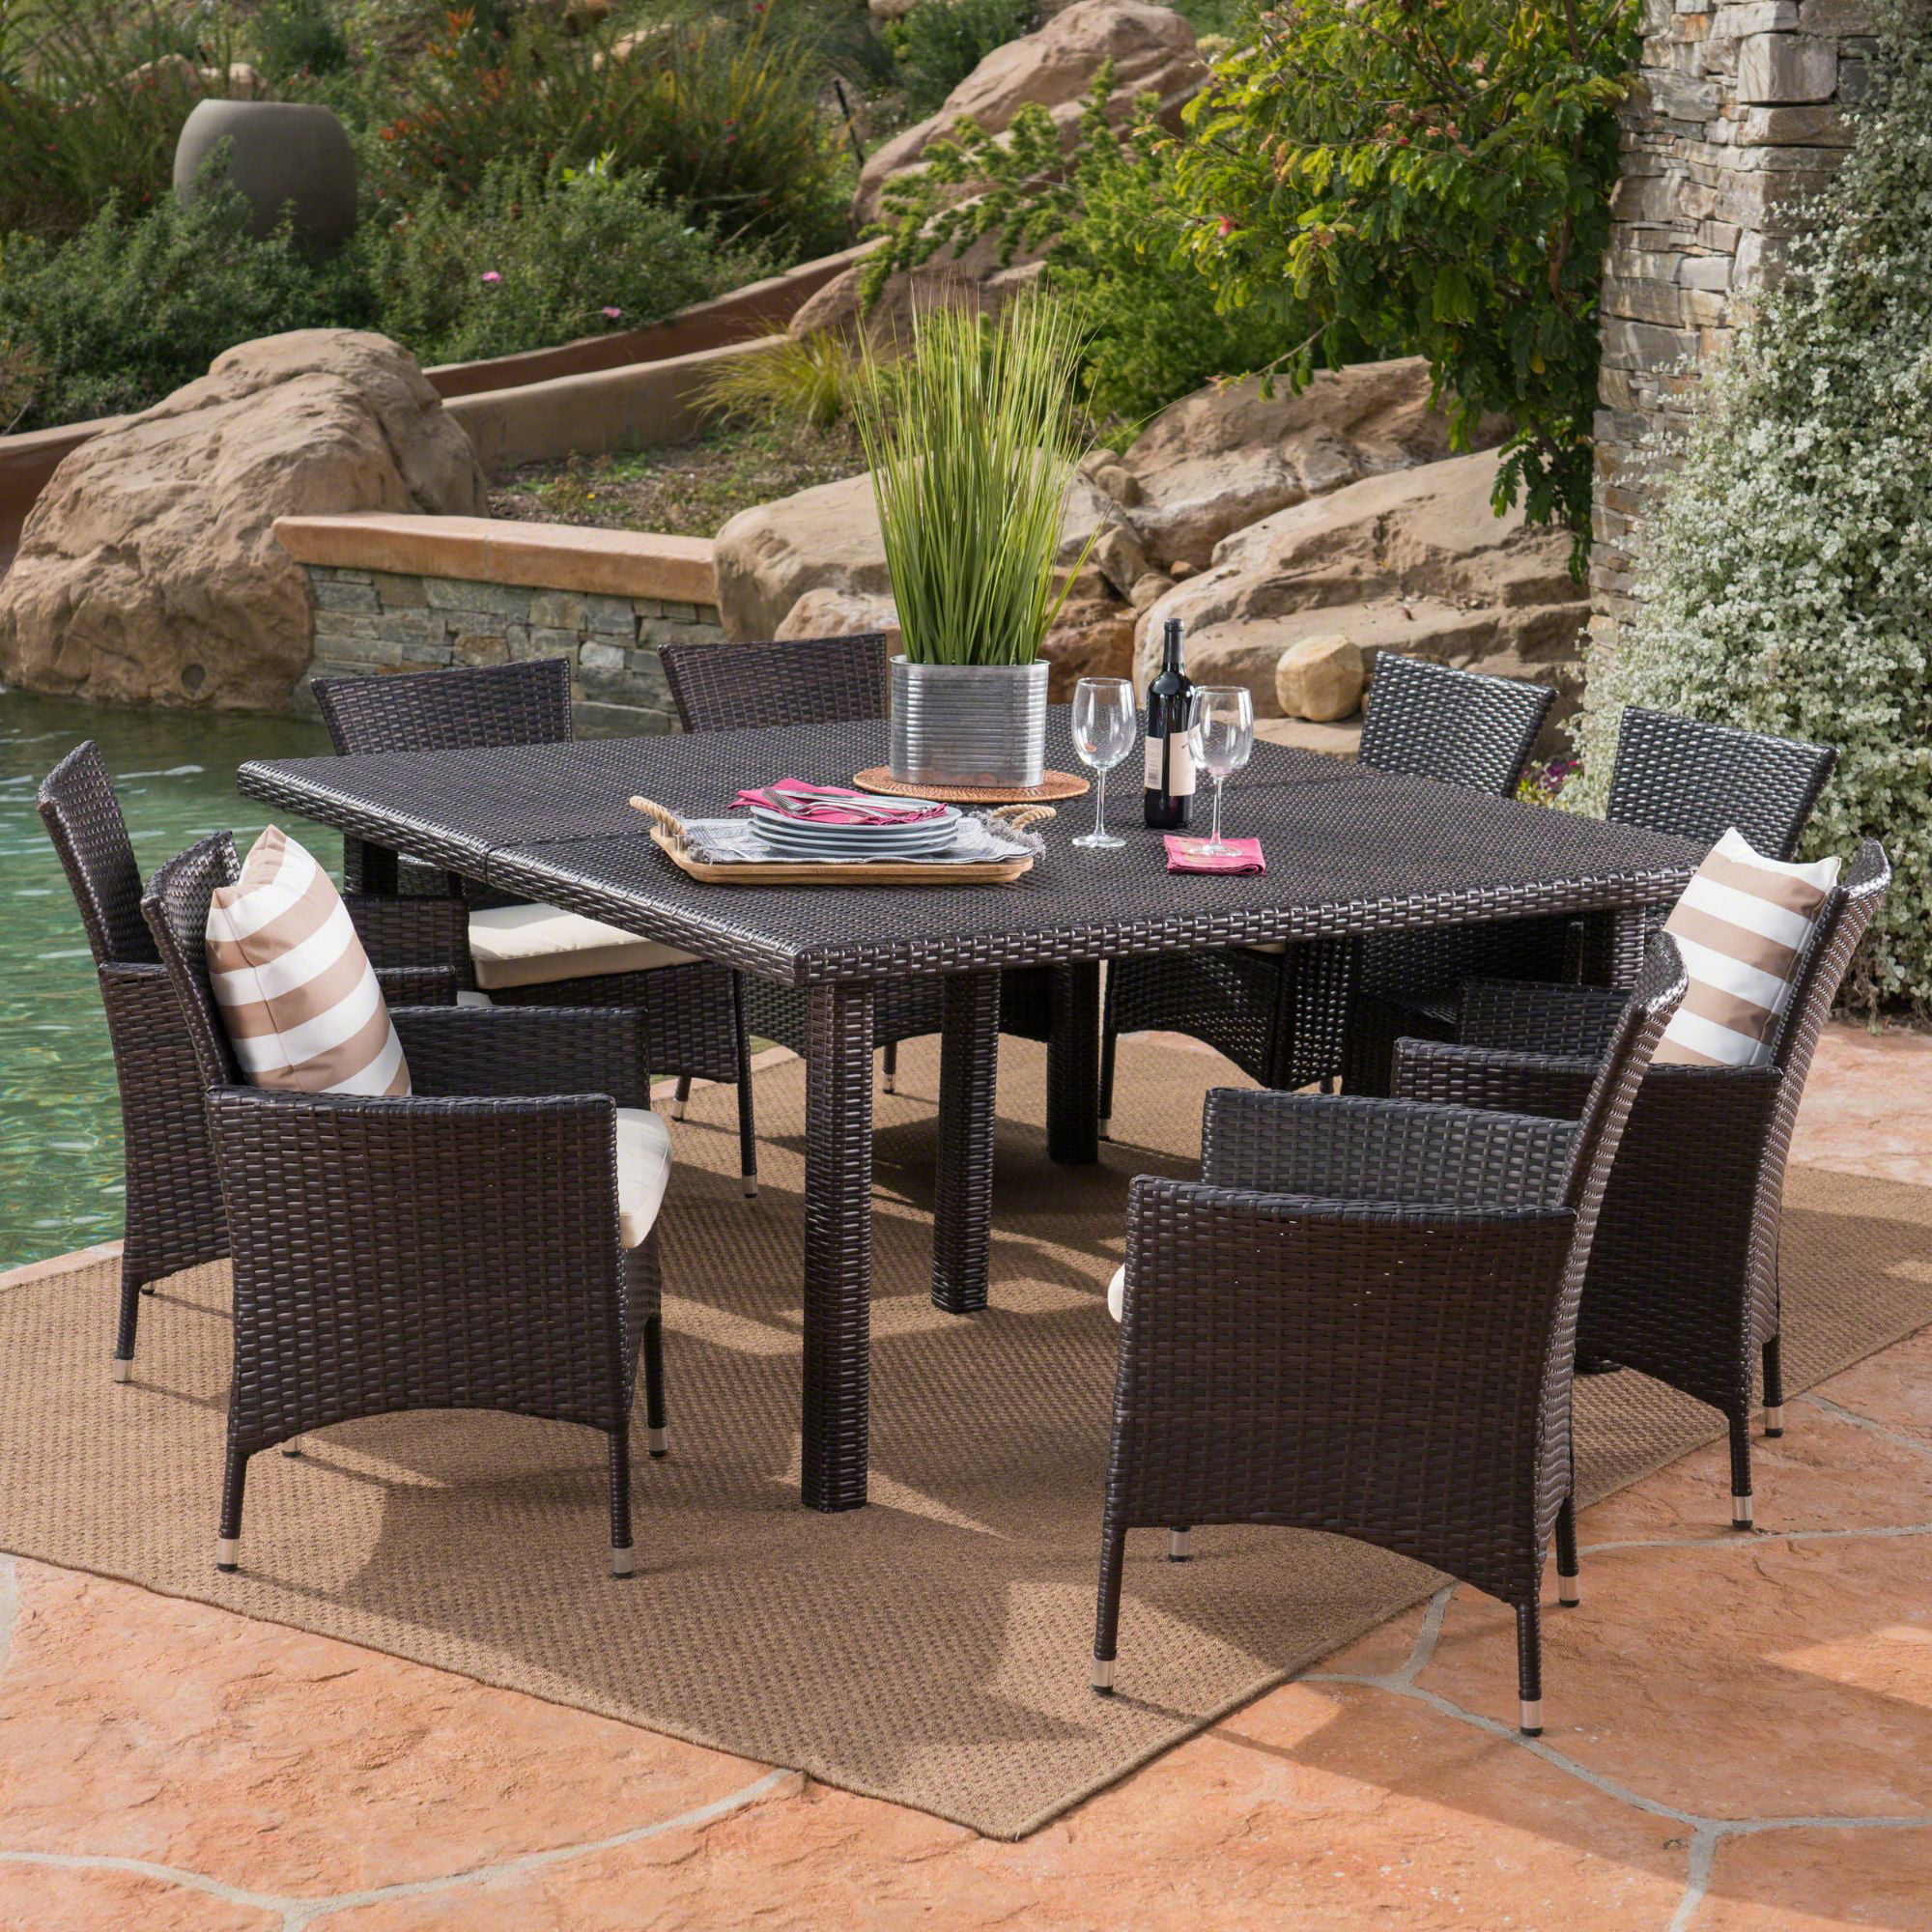 9-Piece Brown Finish Square Wicker Outdoor Furniture Patio Dining Set